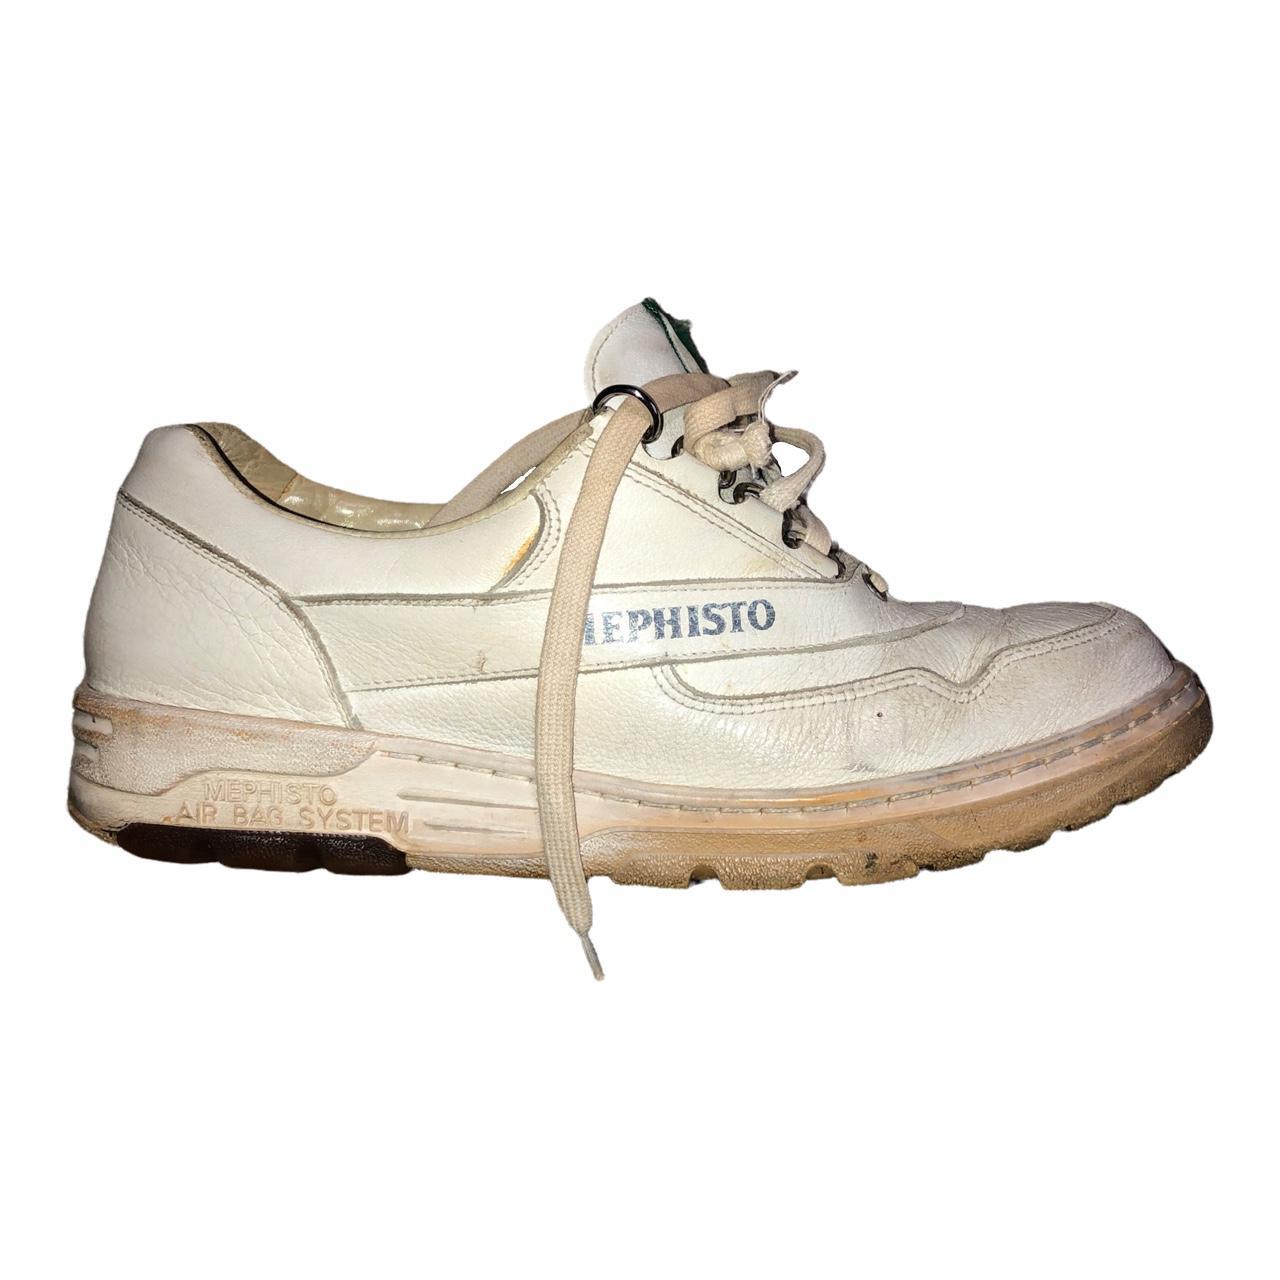 Product Image 3 - Mephisto Sneakers
Dated: 2000s - 2010s

A